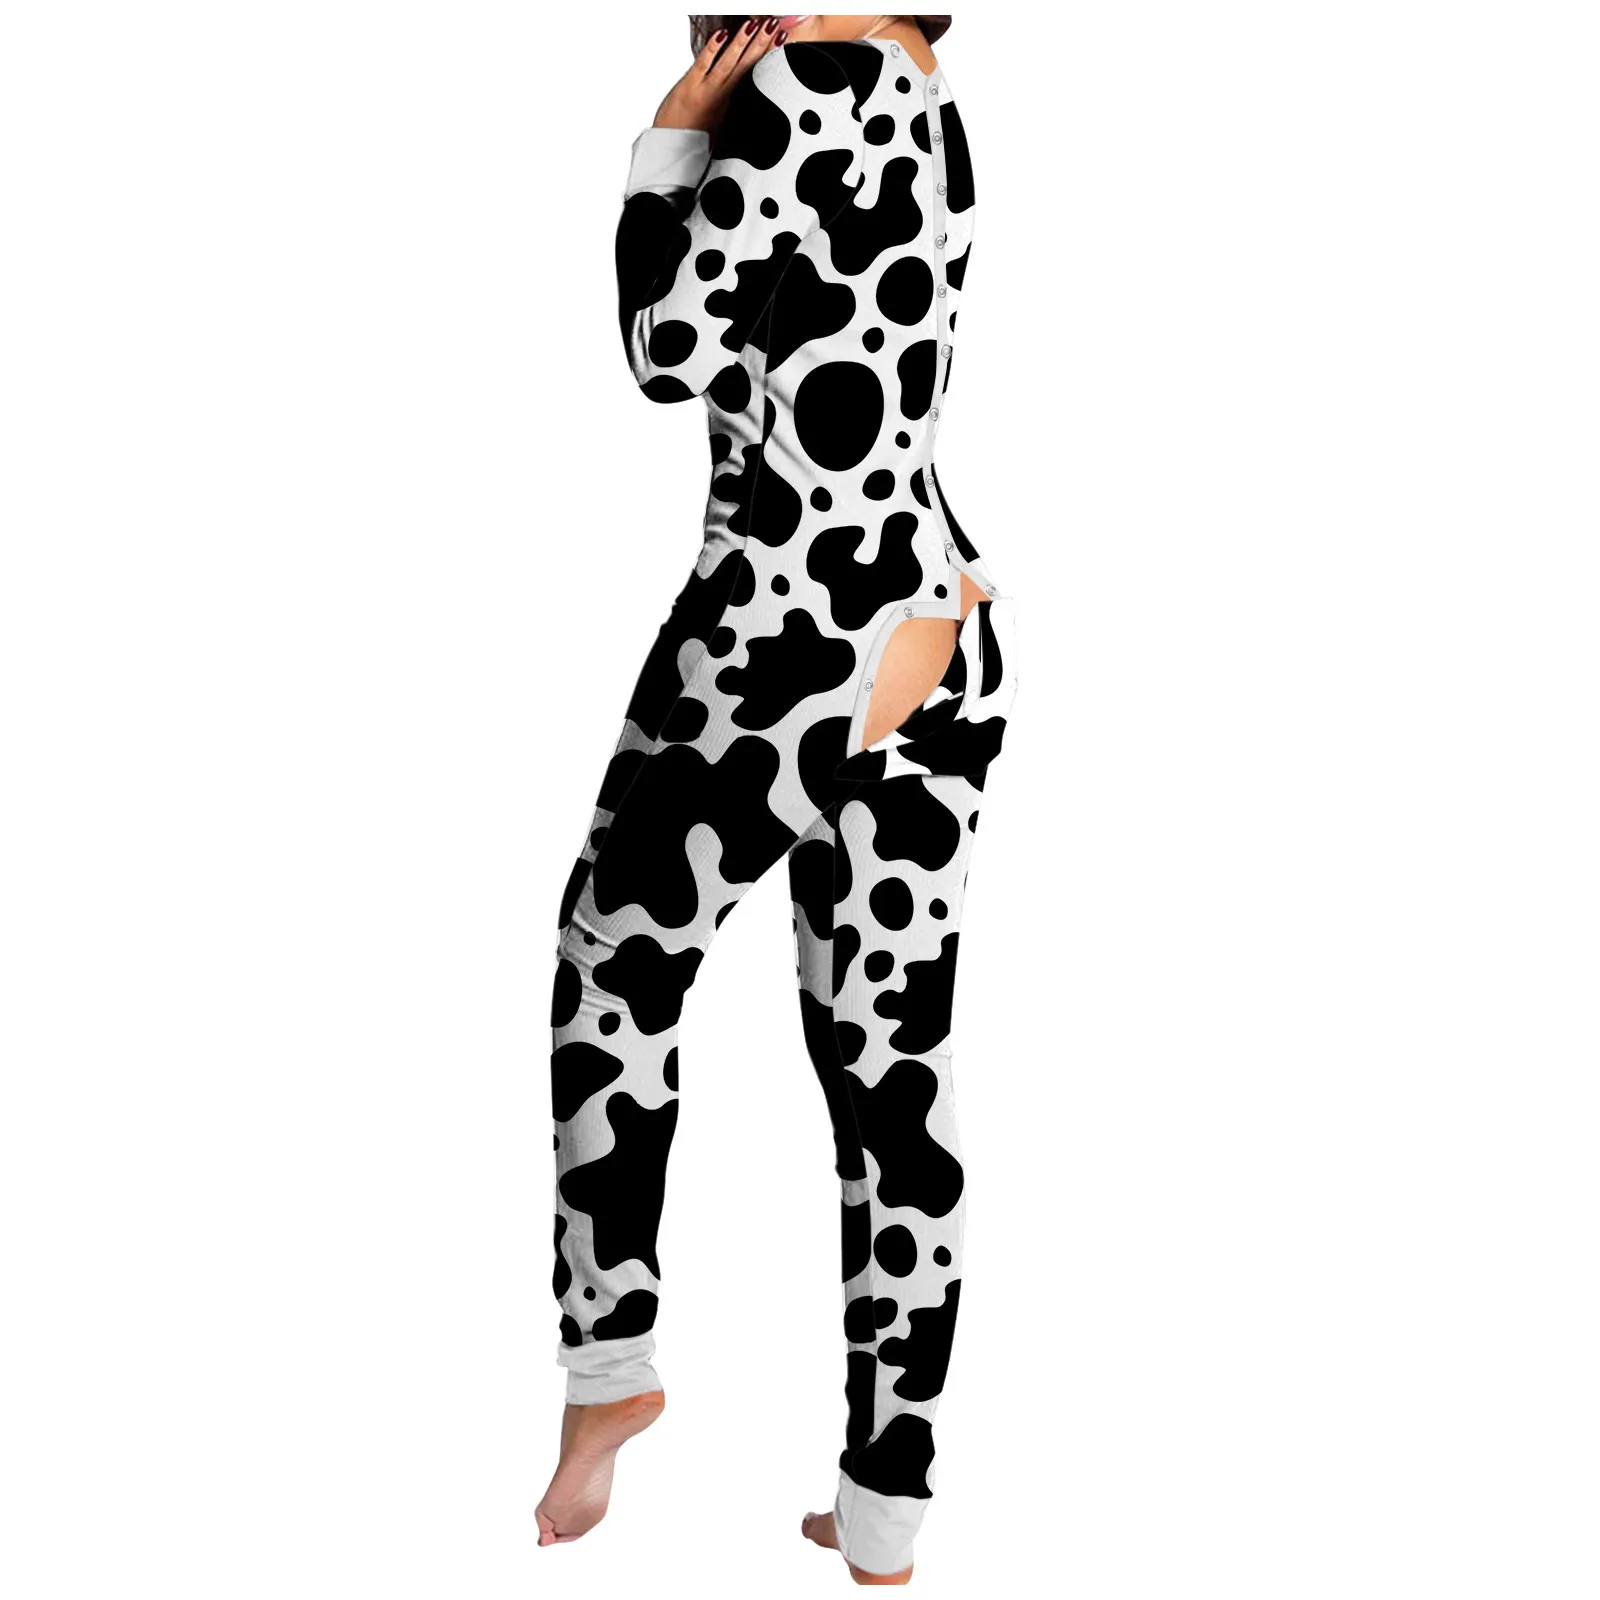 Onesie for adults with flap